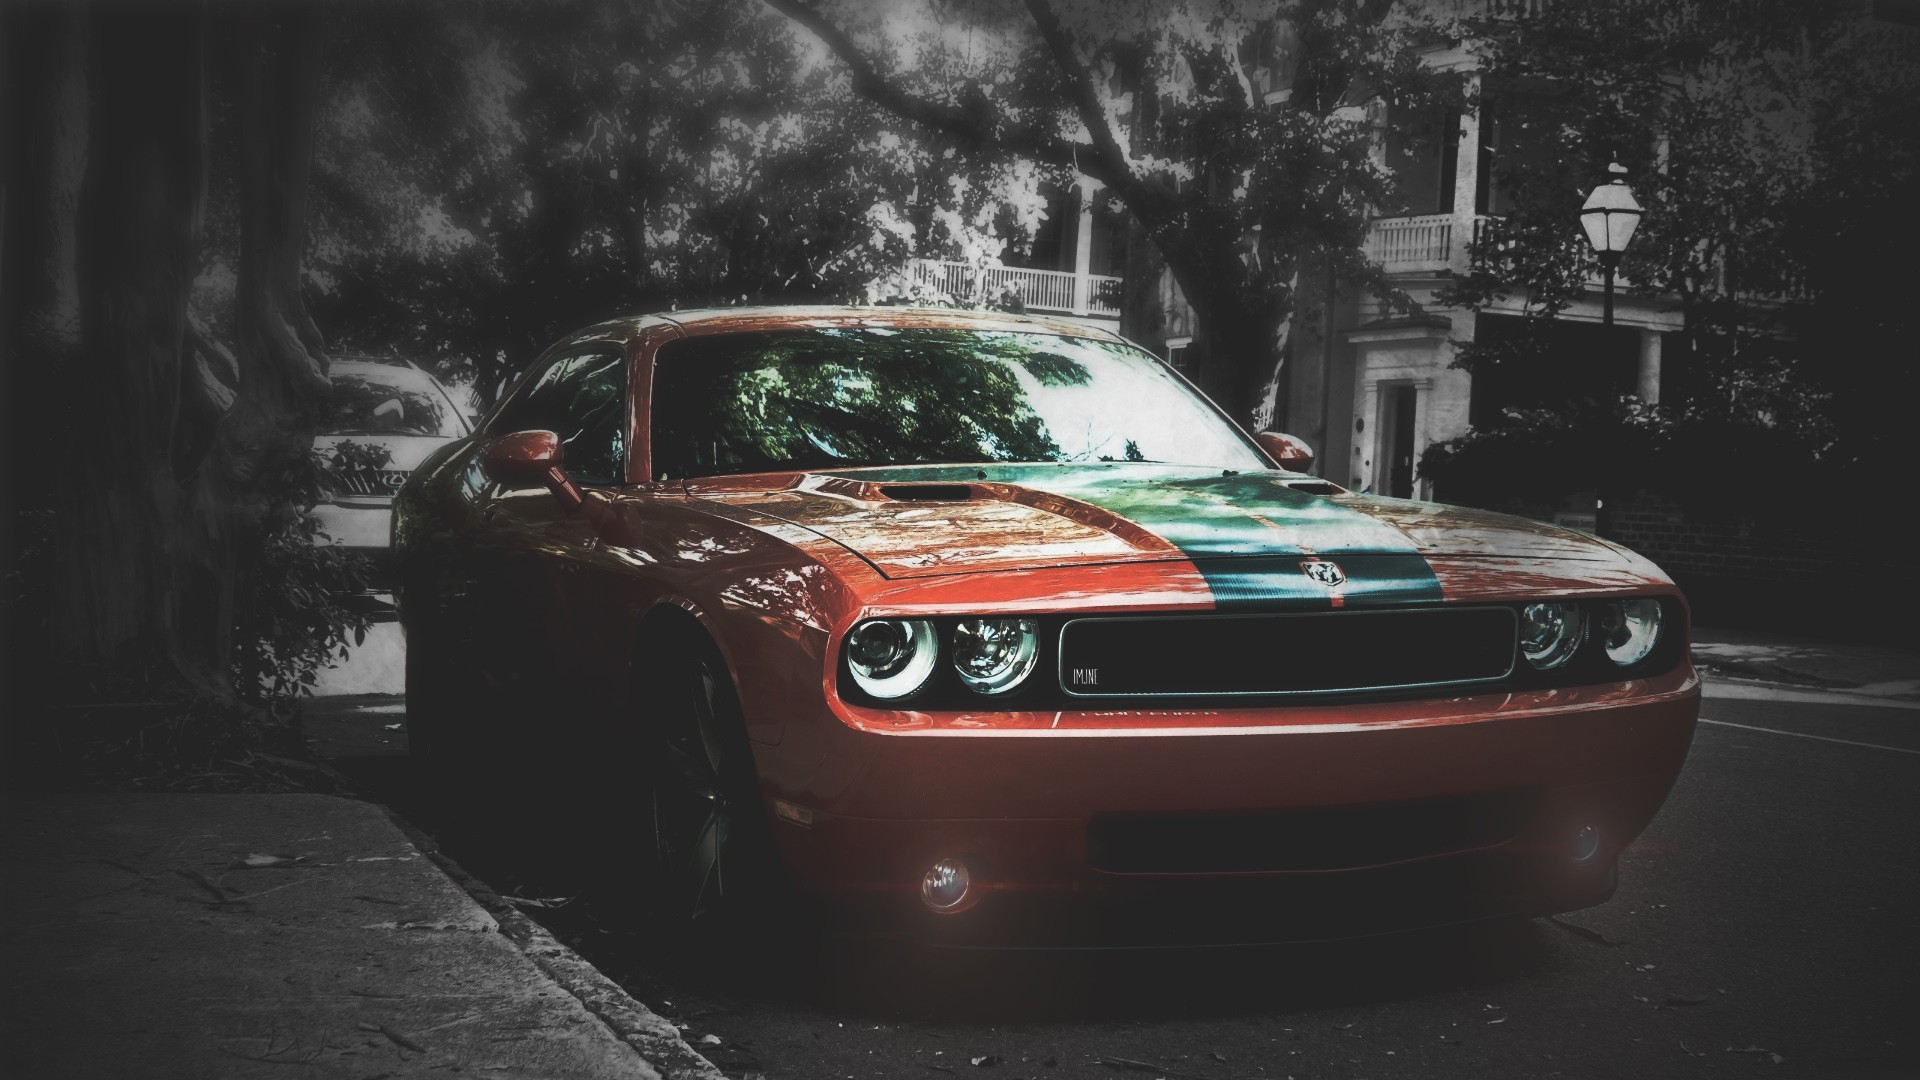 Dodge Rampage Wallpapers